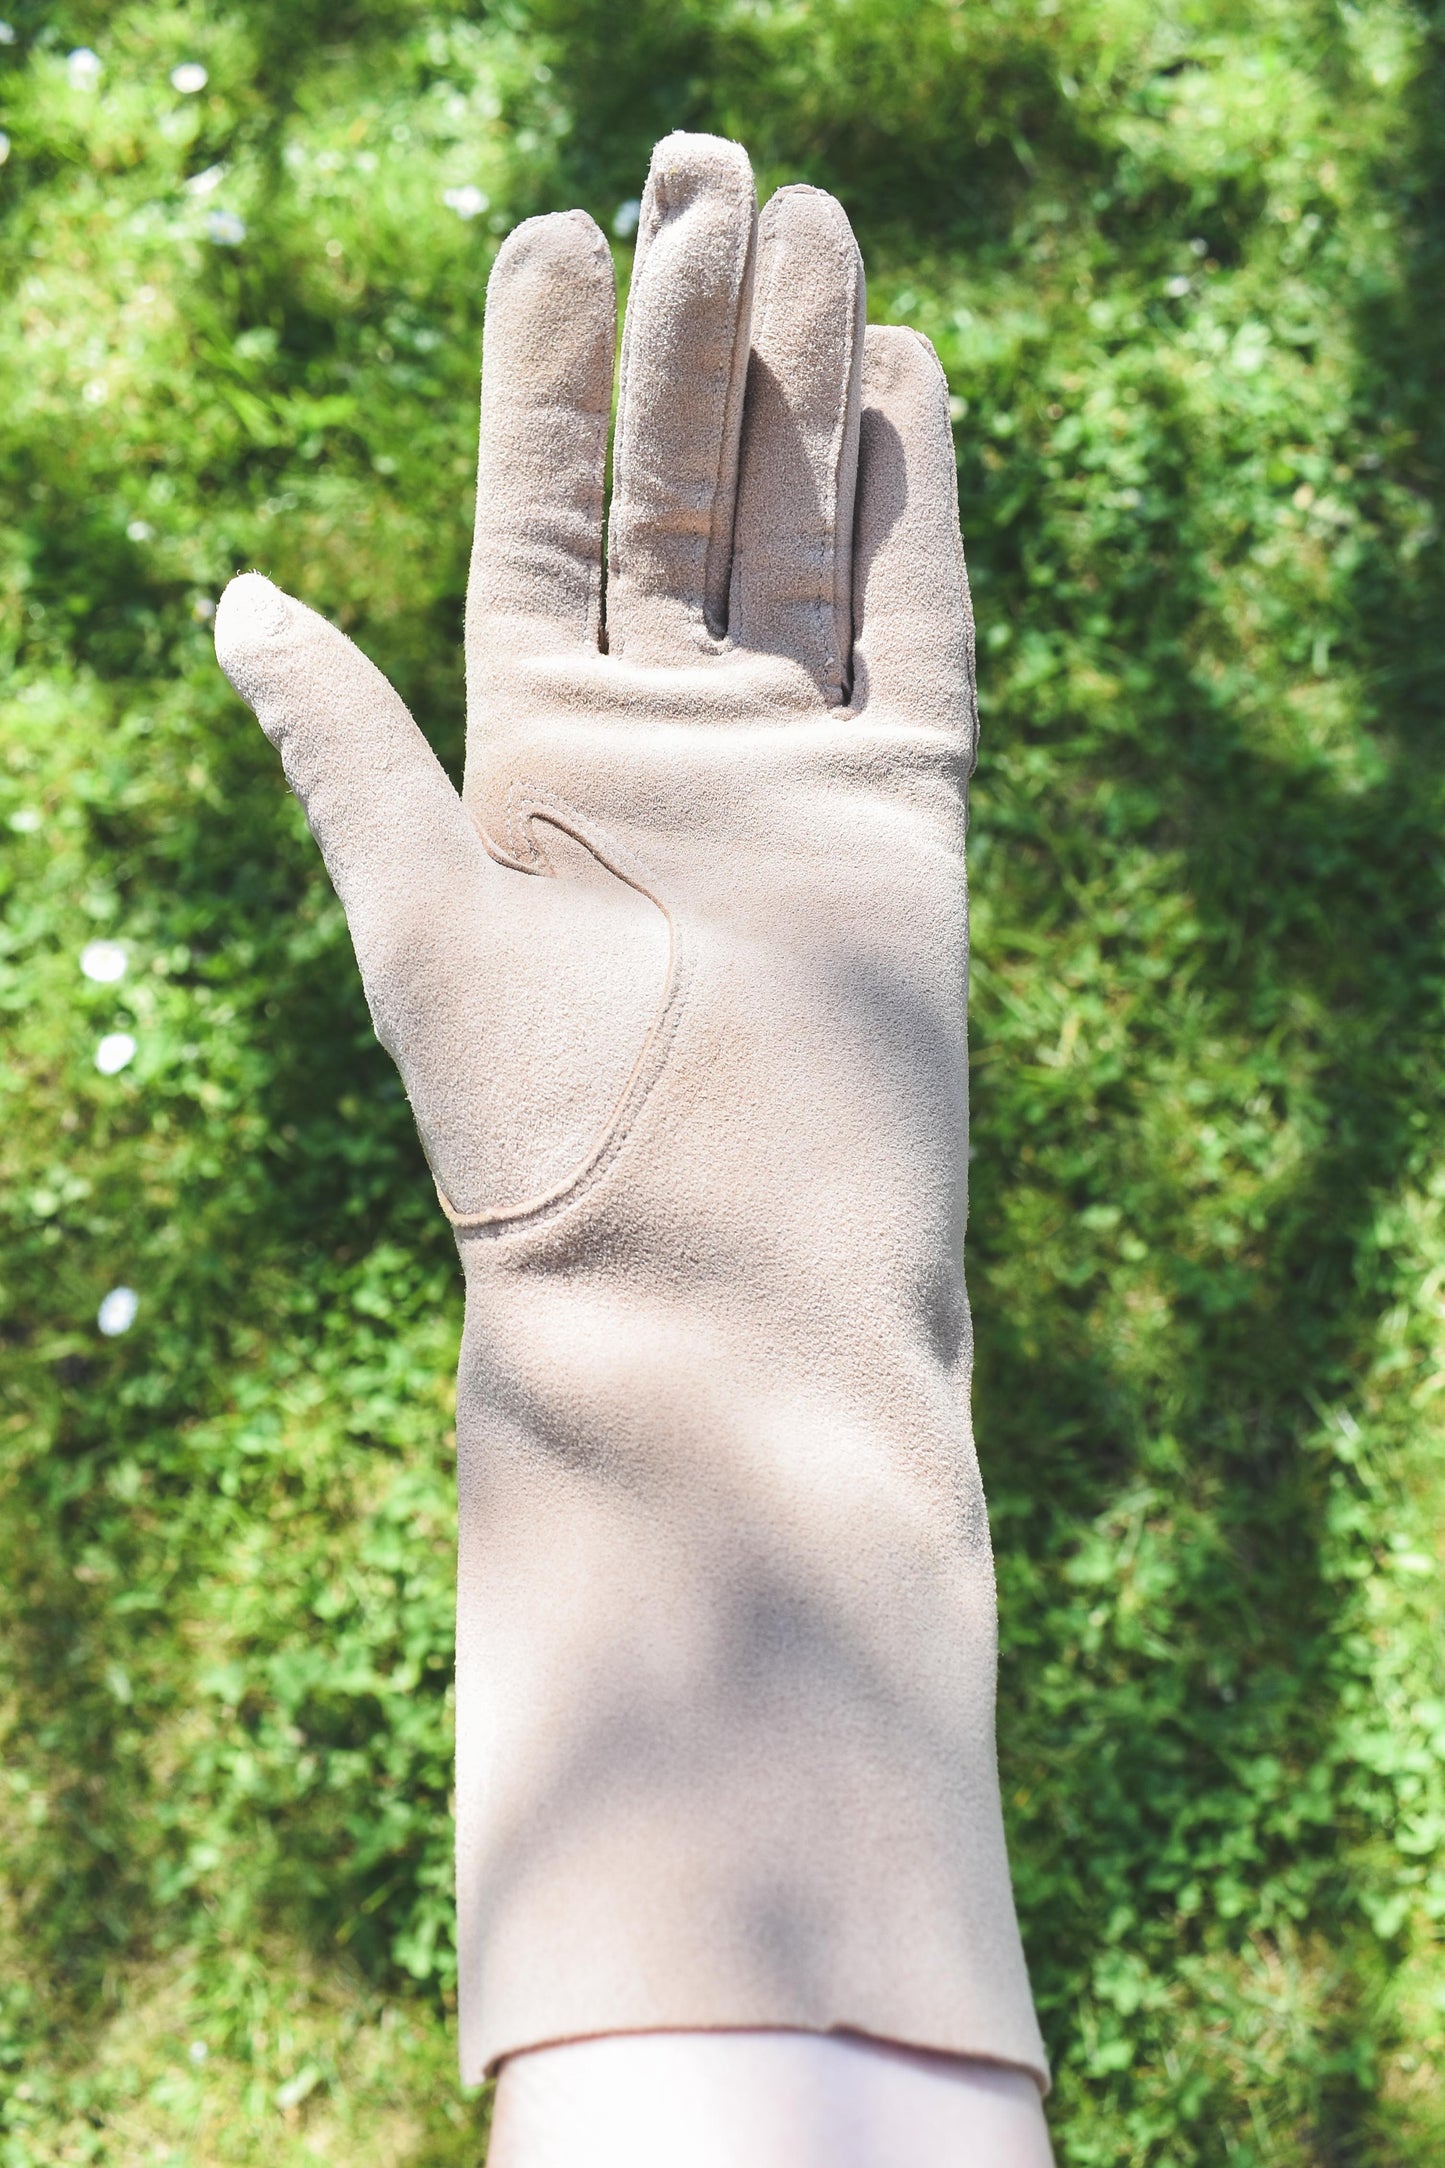 NEW IN! Soft gloves